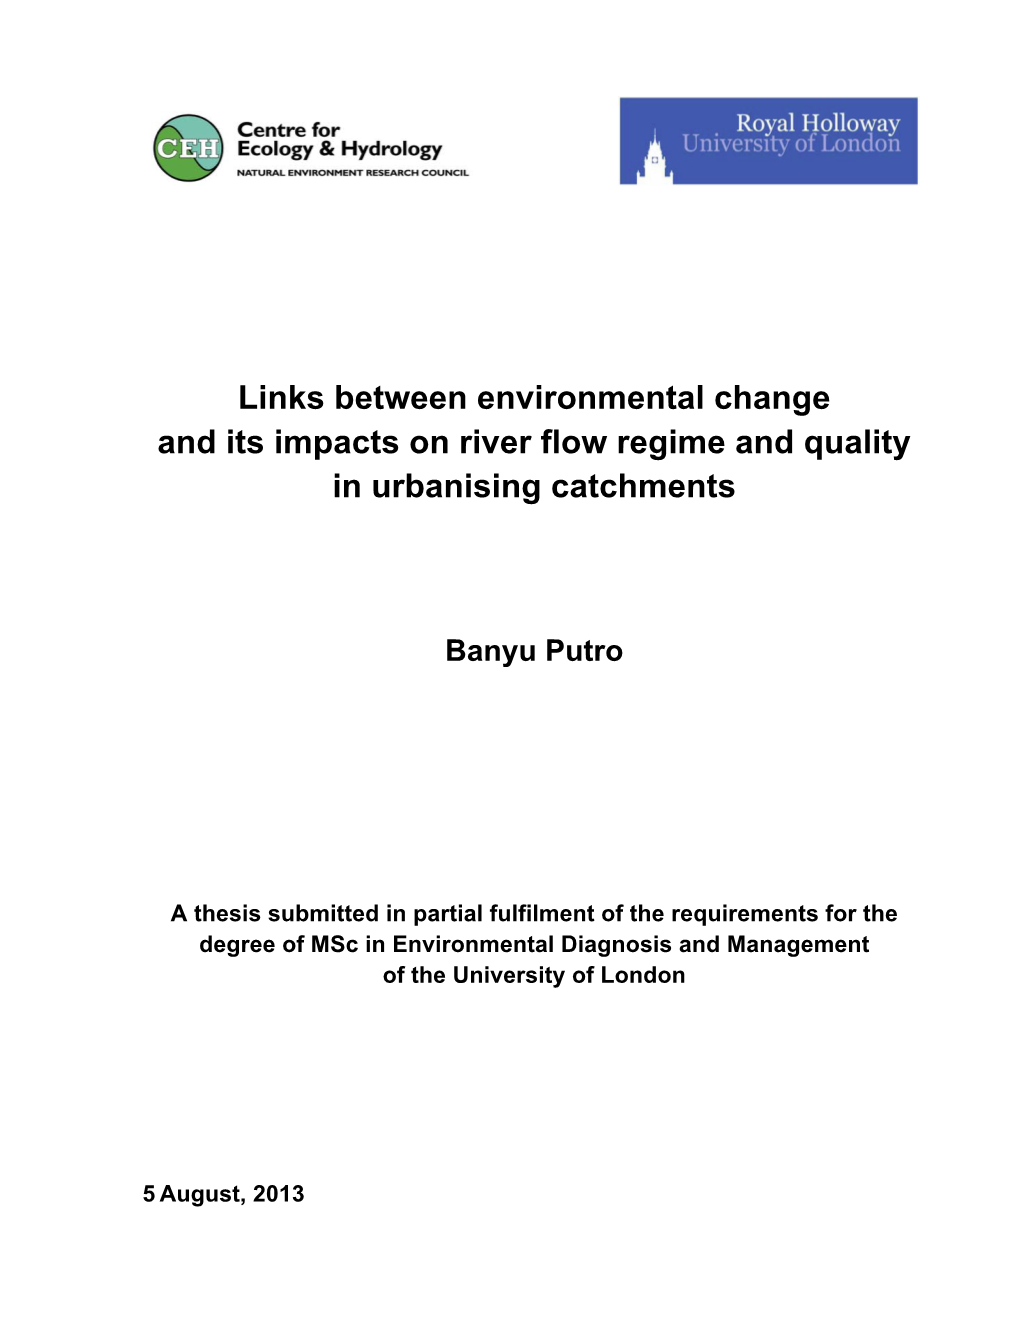 Links Between Environmental Change and Its Impacts on River Flow Regime and Quality in Urbanising Catchments